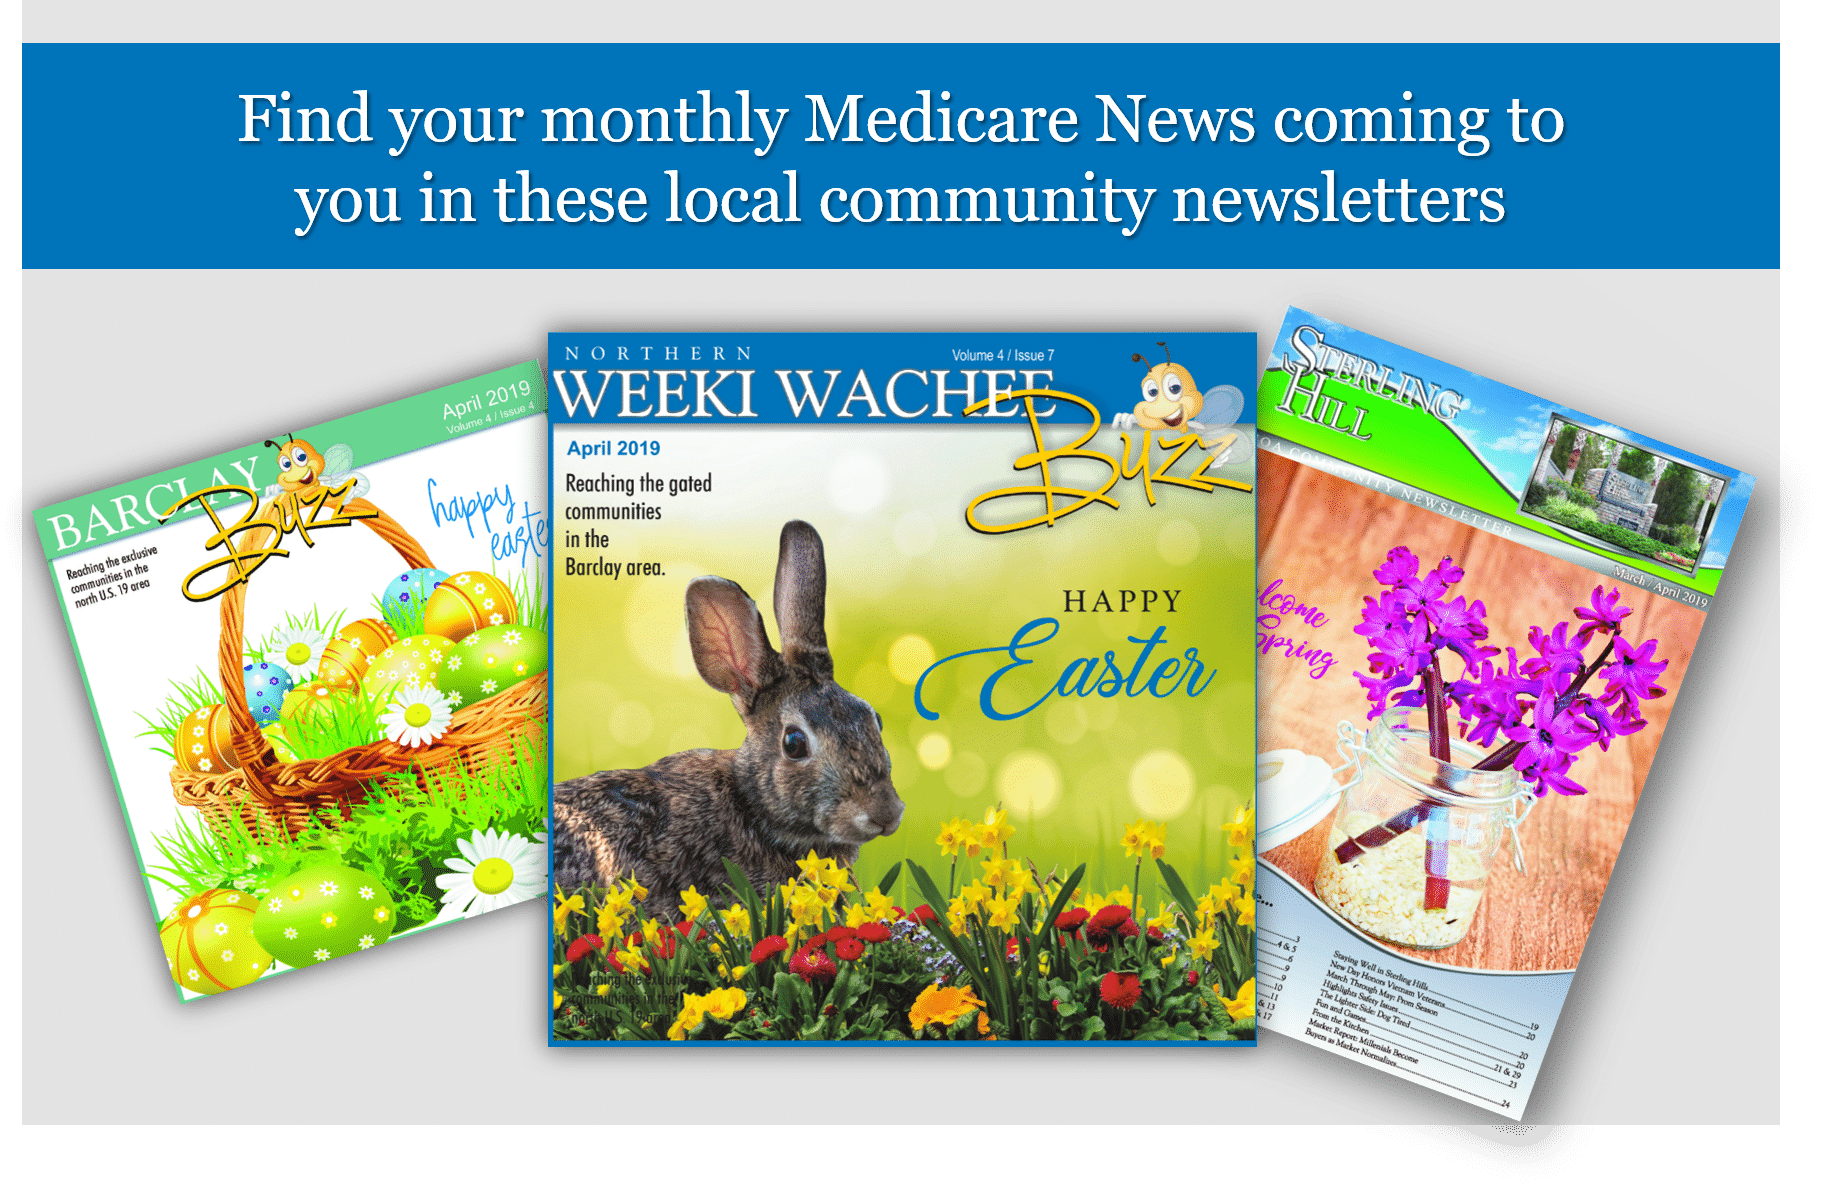 April 2019 Monthly Medicare News & Community Events